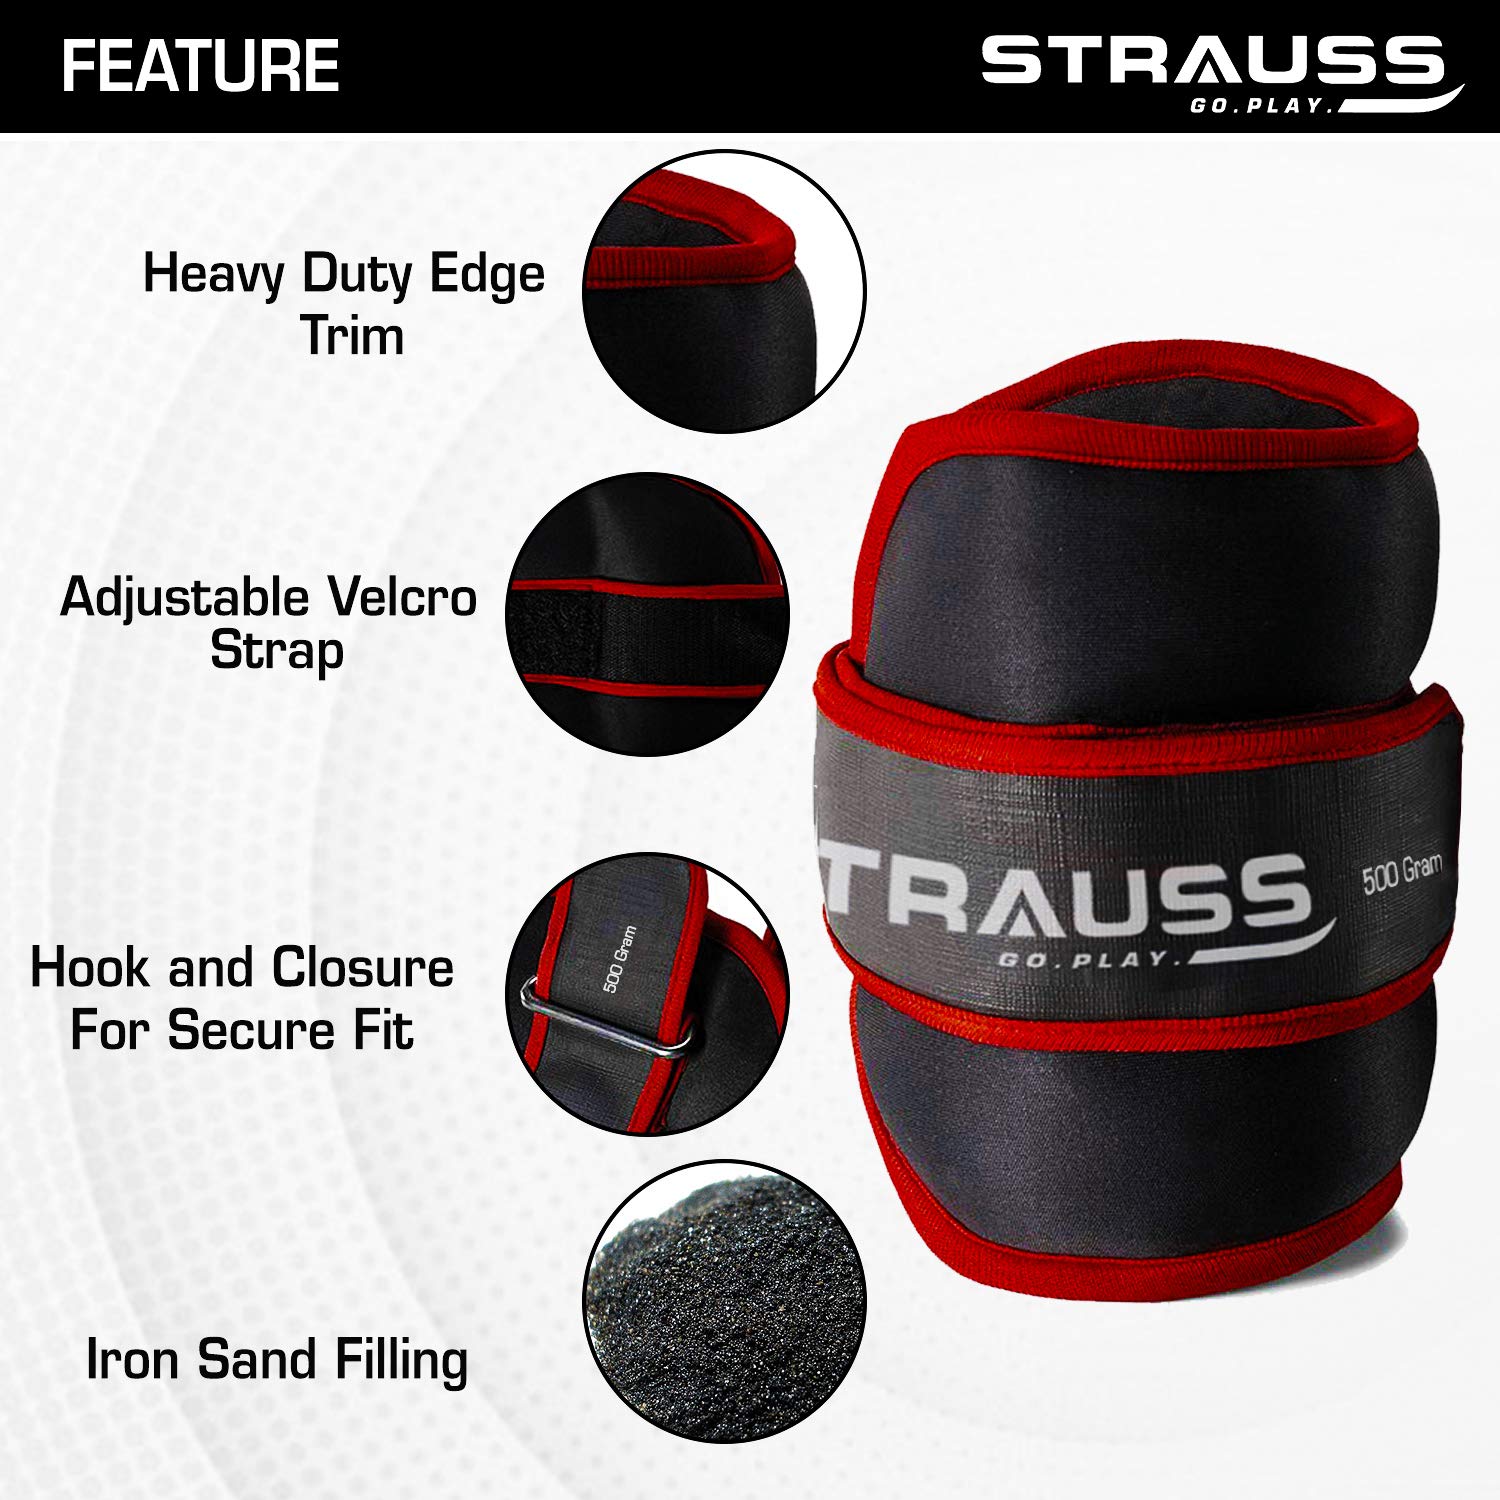 Strauss Round Shape Adjustable Ankle Weight/Wrist Weights 0.5 KG X 2 | Ideal for Walking, Running, Jogging, Cycling, Gym, Workout & Strength Training | Easy to Use on Ankle, Wrist, Leg, (Red)